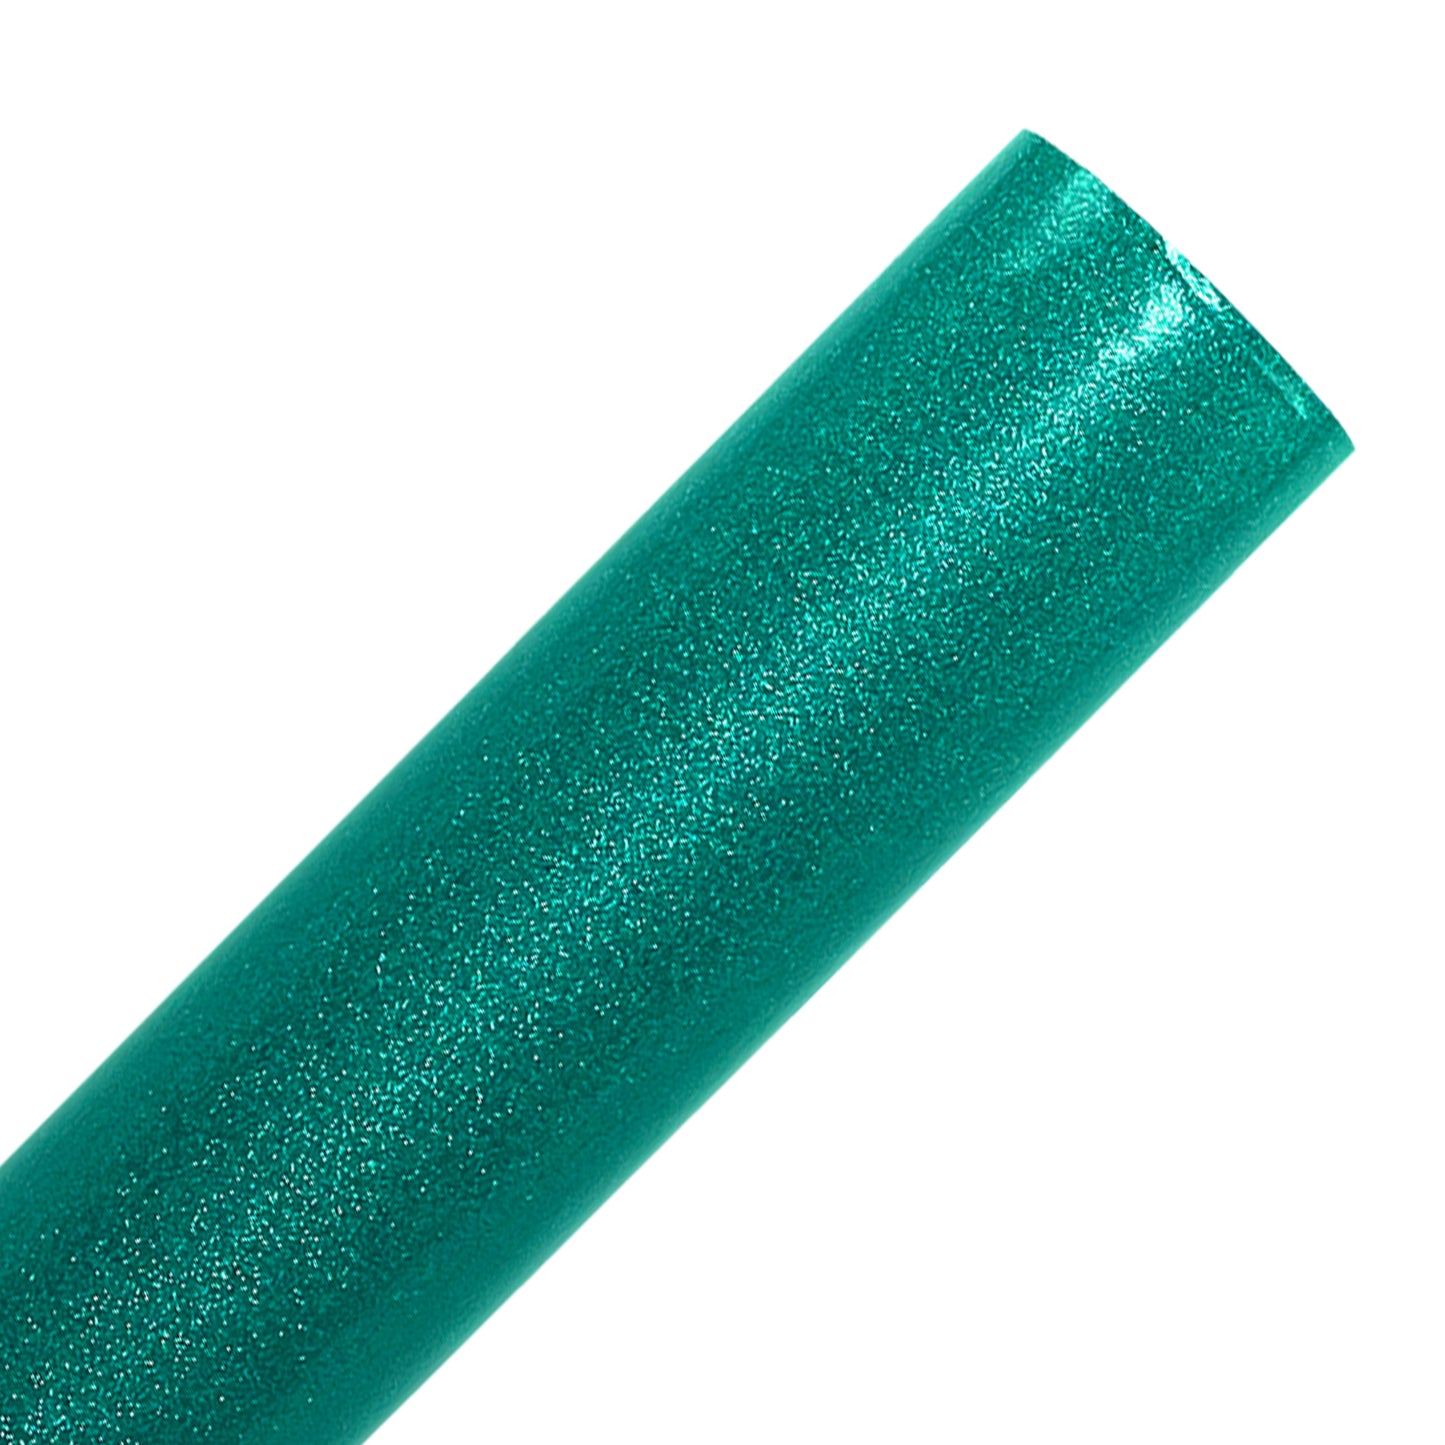 Teal Transparent Glitter Adhesive Vinyl Rolls By Craftables